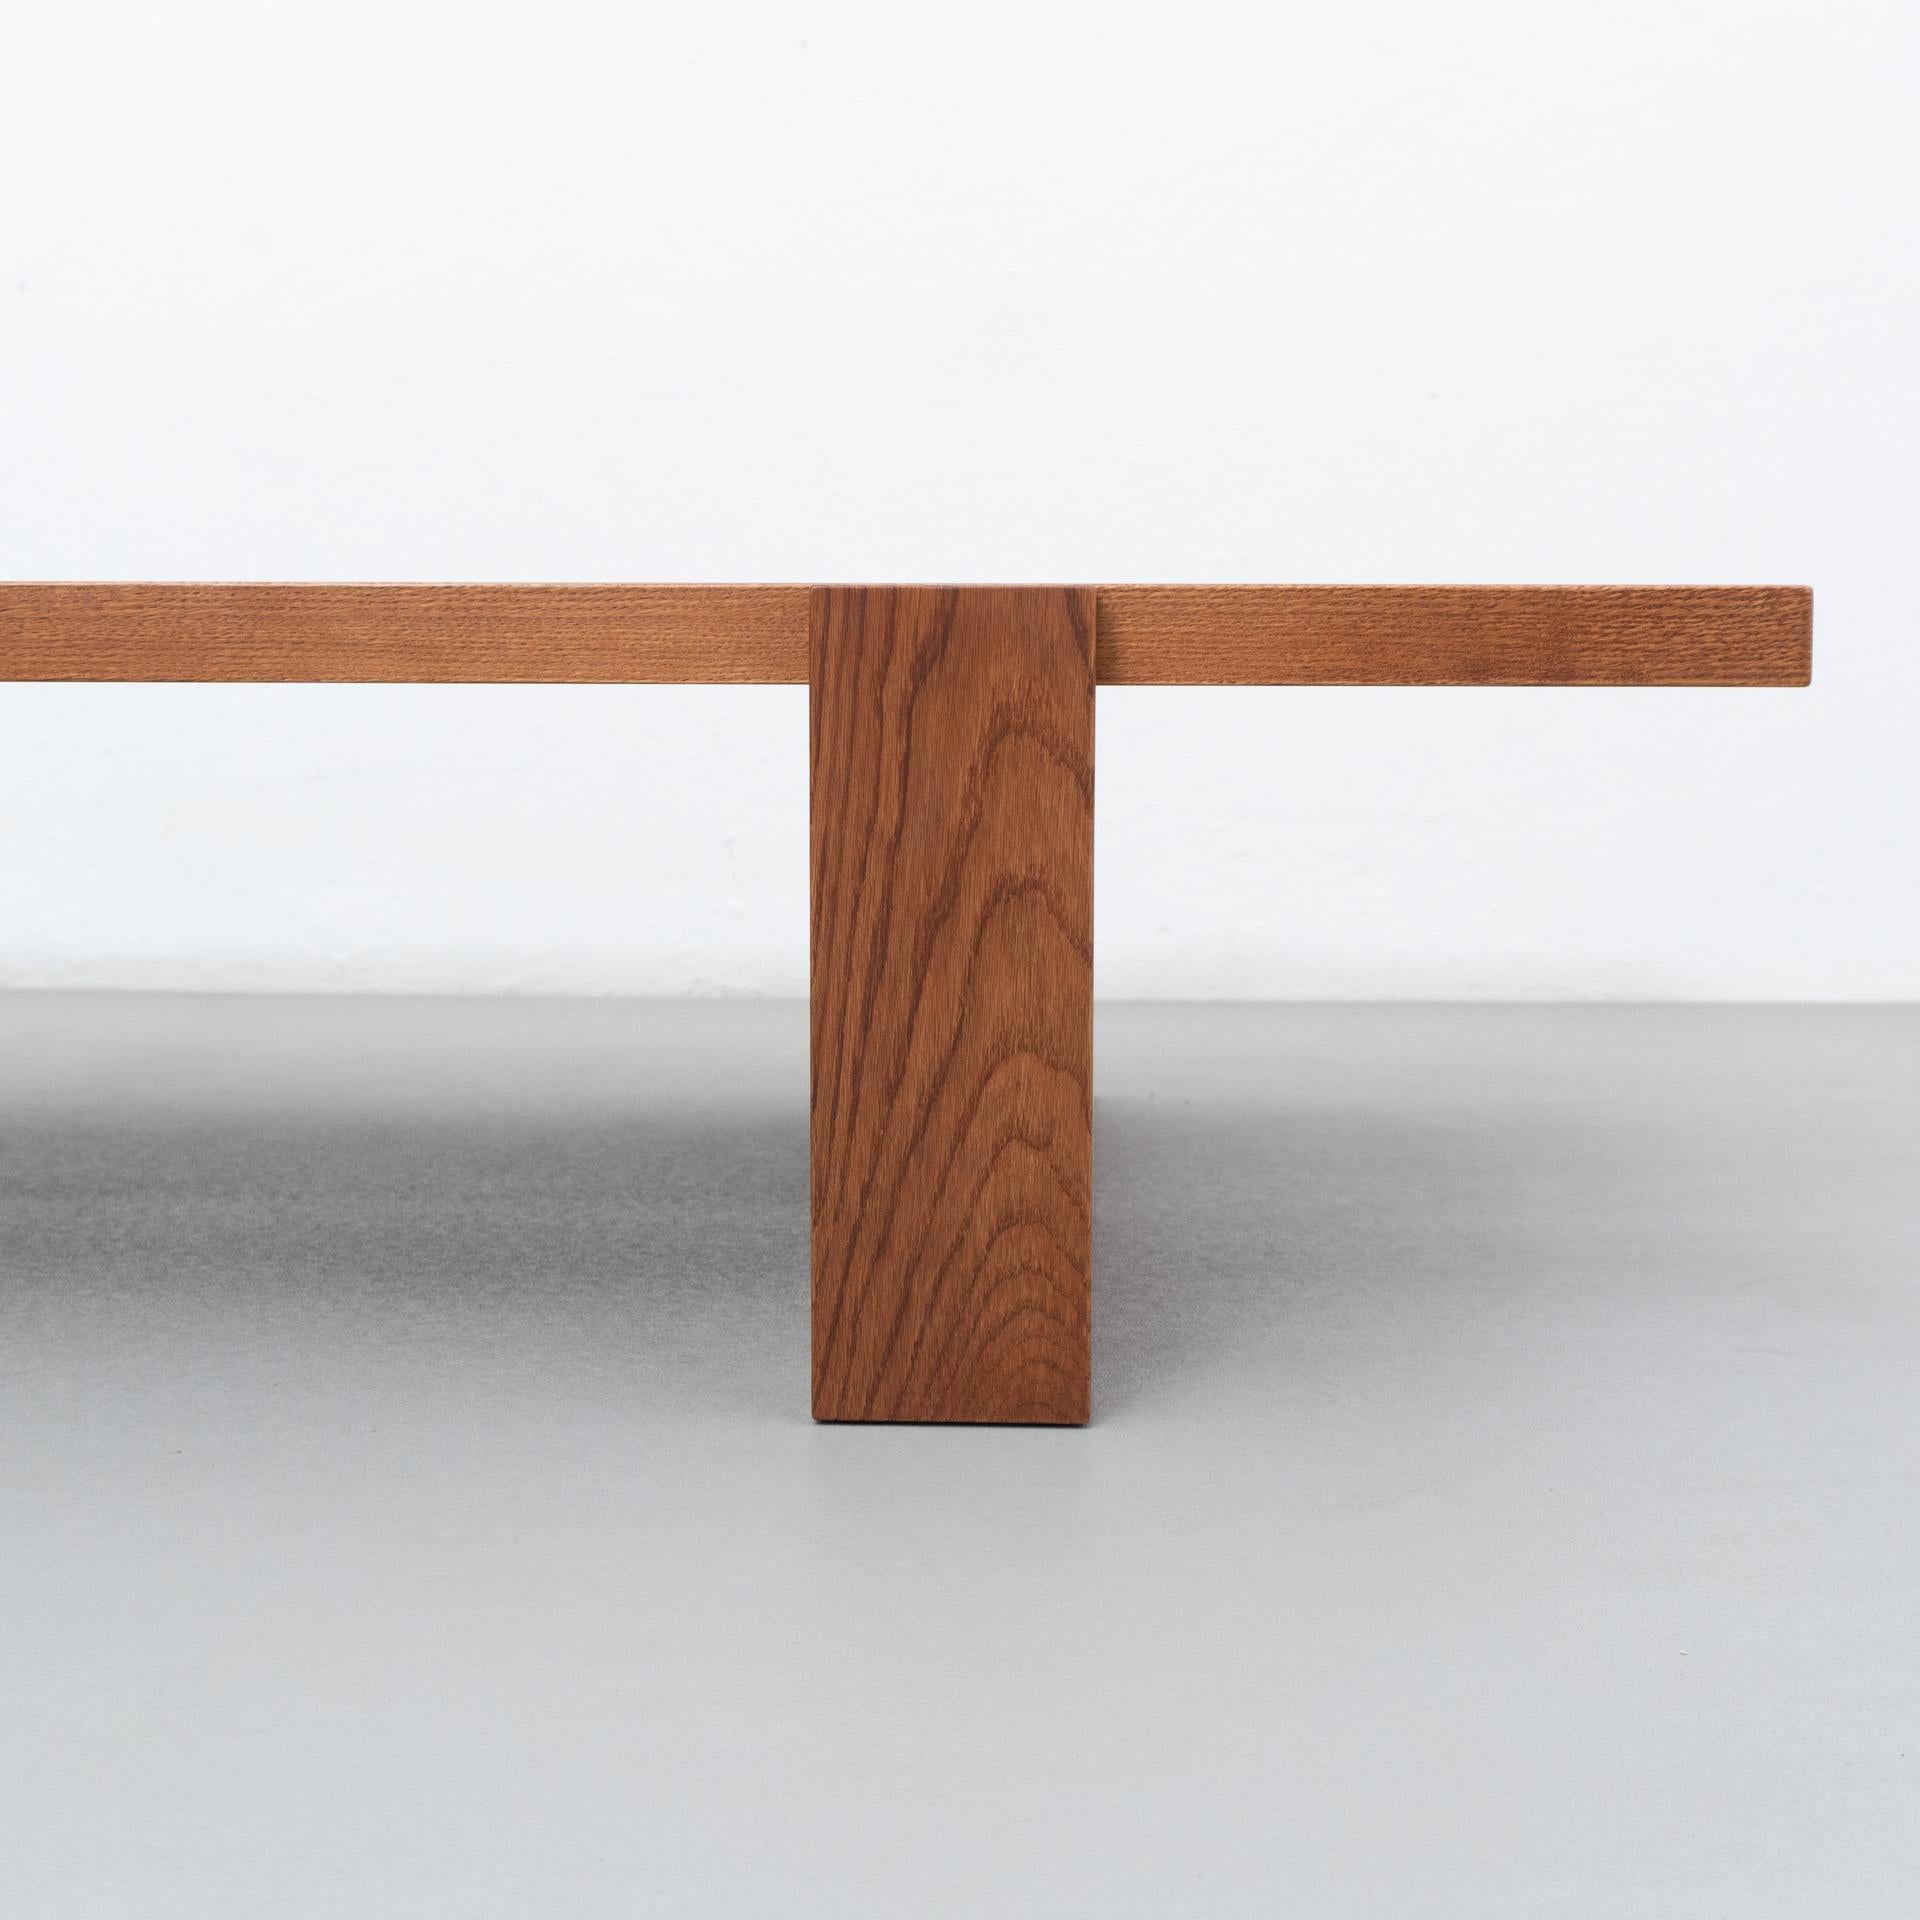 Spanish Dada Est. Contemporary Solid Oak Low Table  For Sale